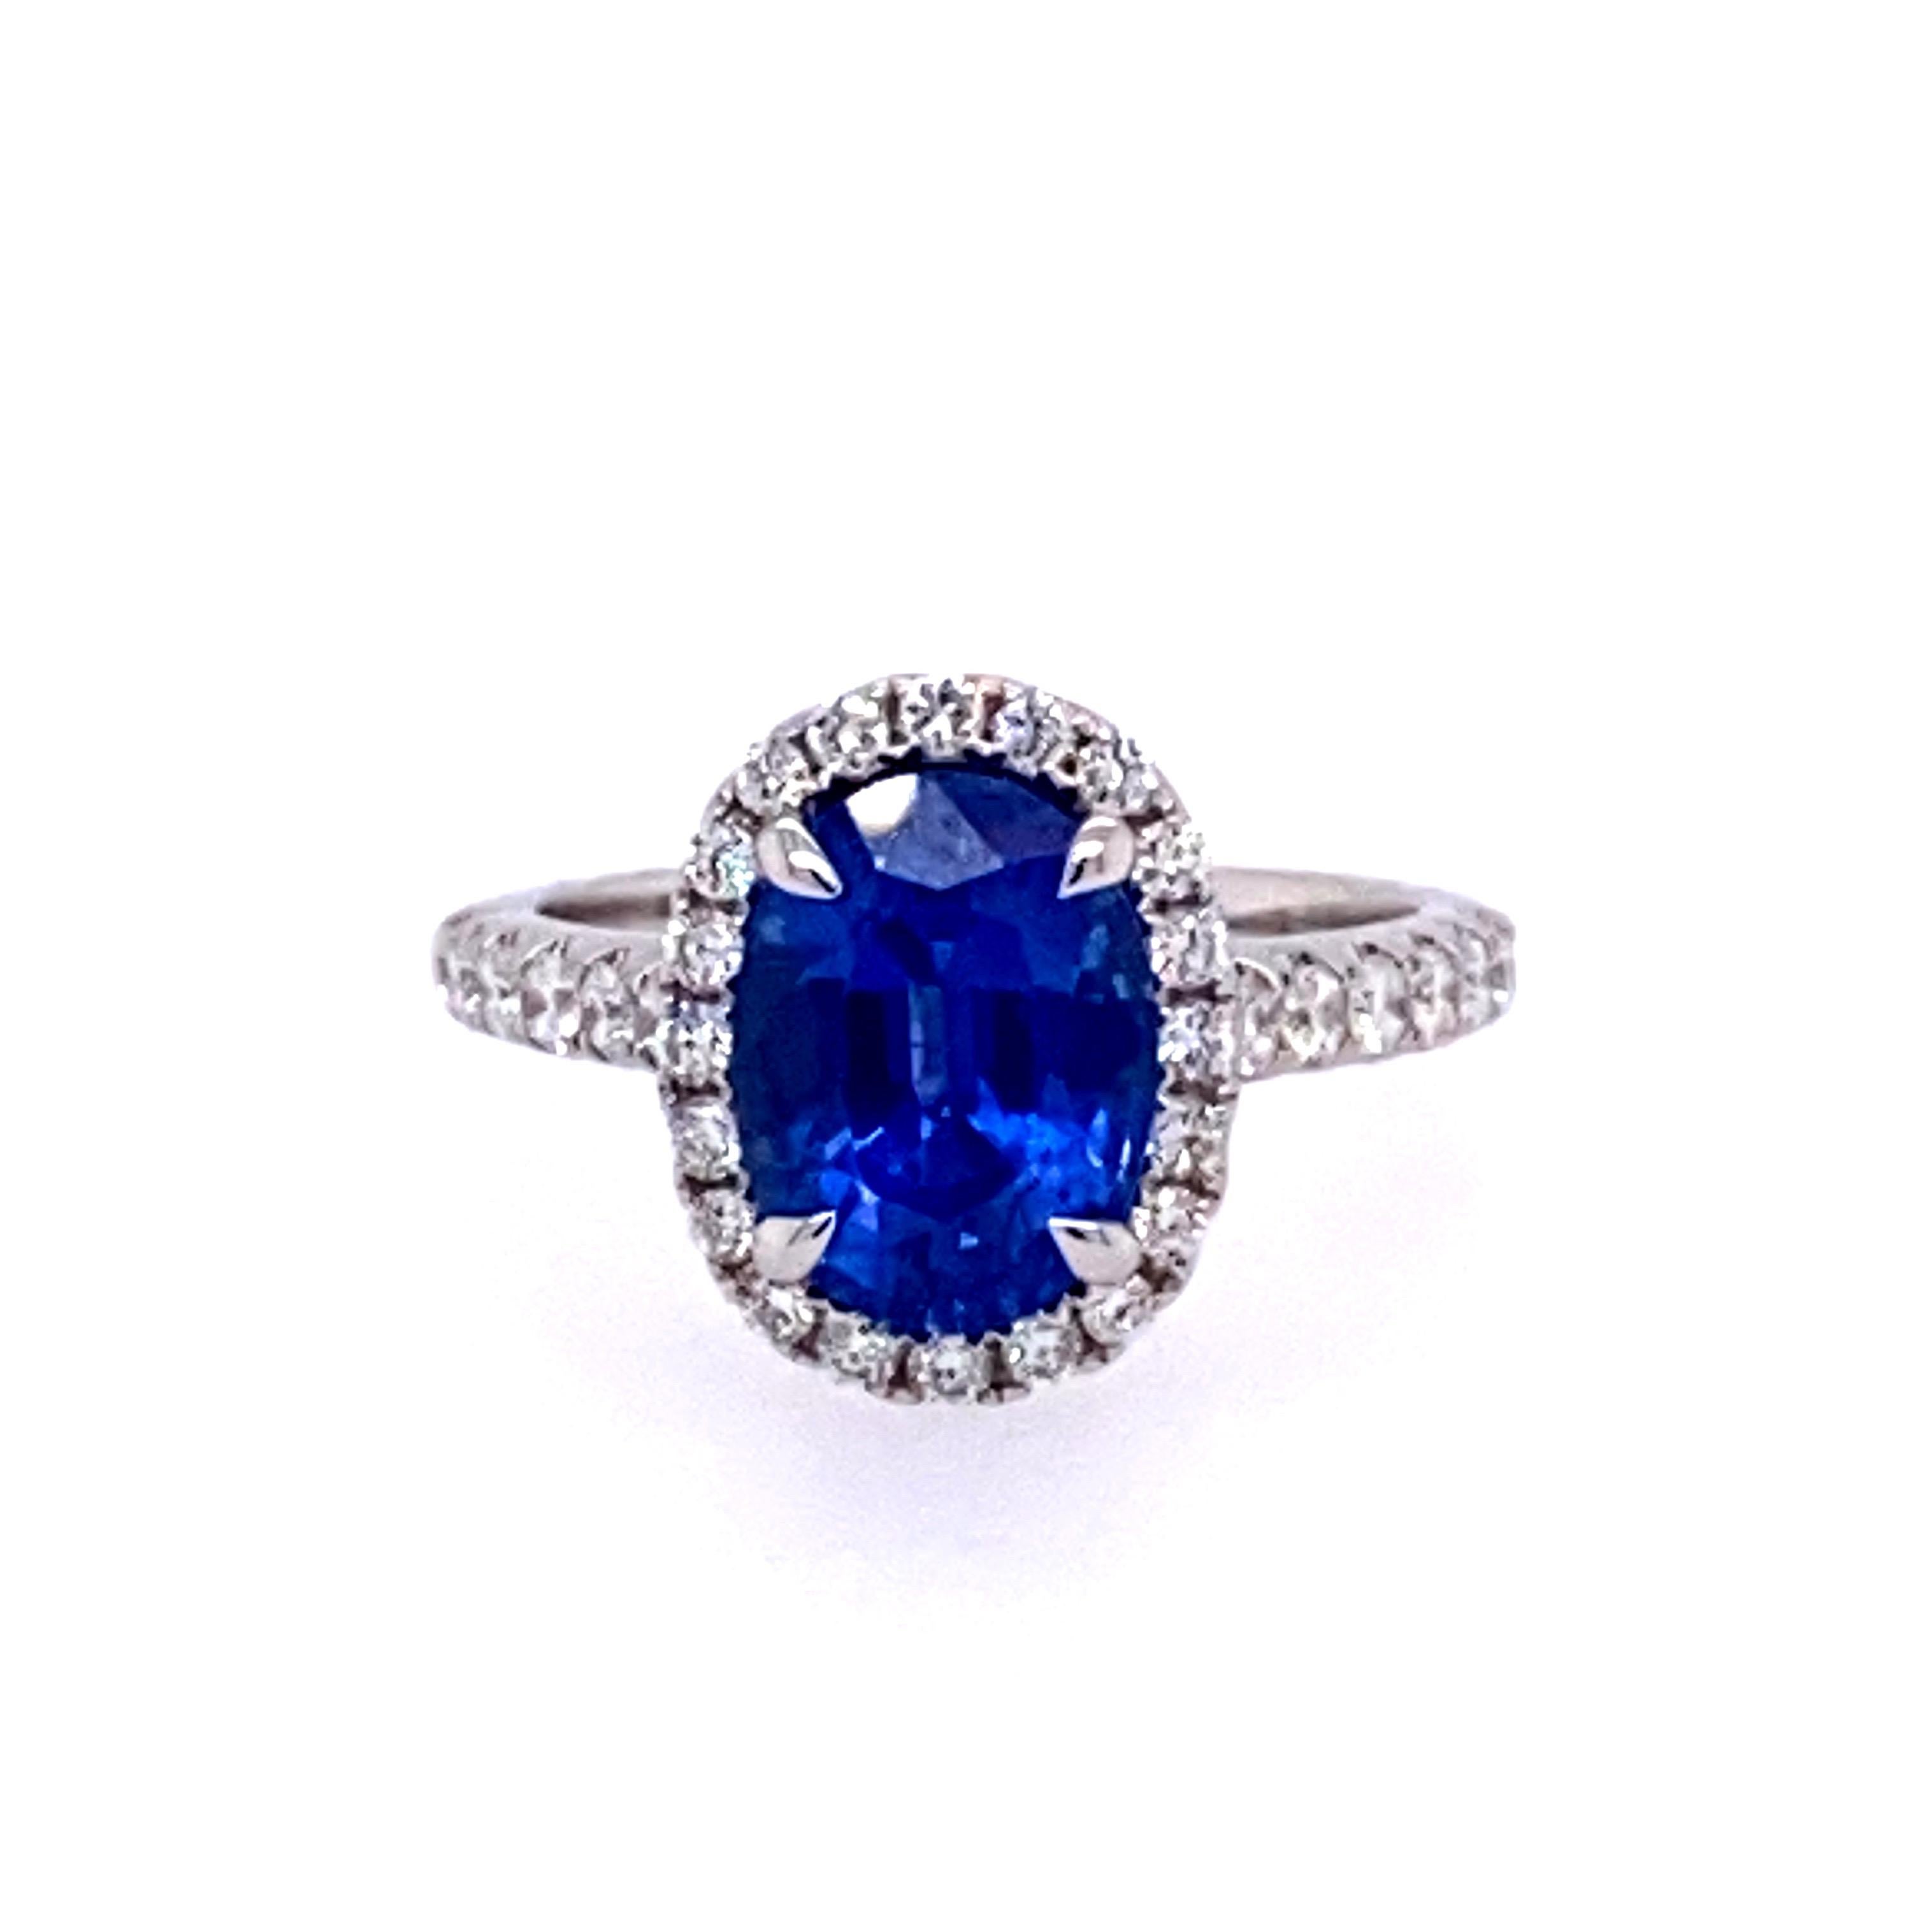 This stunning ring showcases a beautiful 3.84 carat oval sapphire with a white diamond halo set in 18 karat white gold.
Total diamond weight = 0.62 carats. Ring size is 6 1/2.